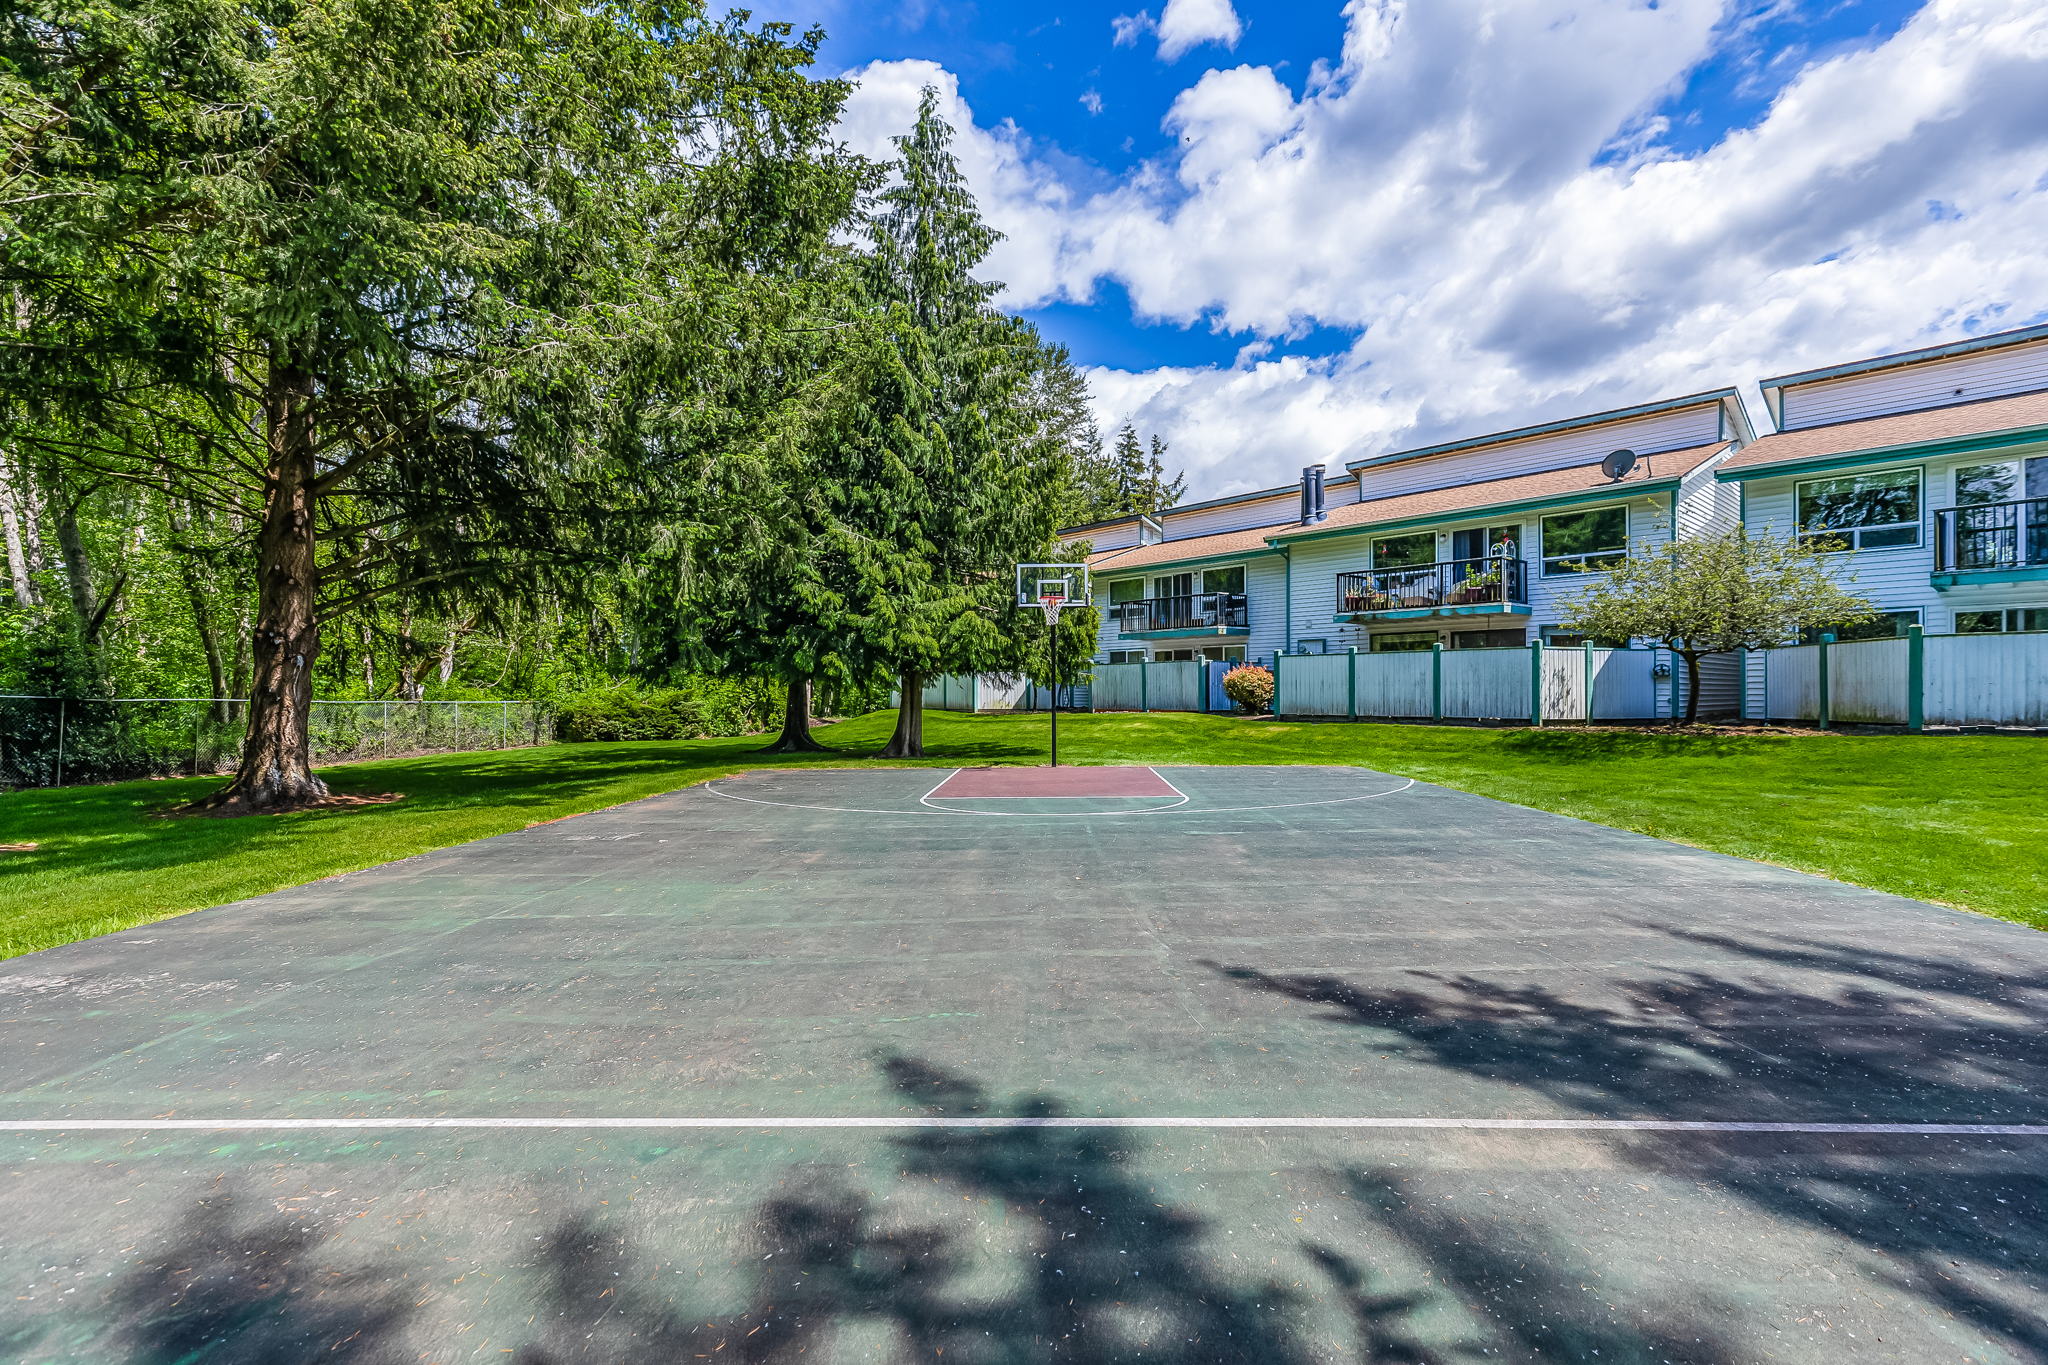 Basket Ball court (condo is the center one)